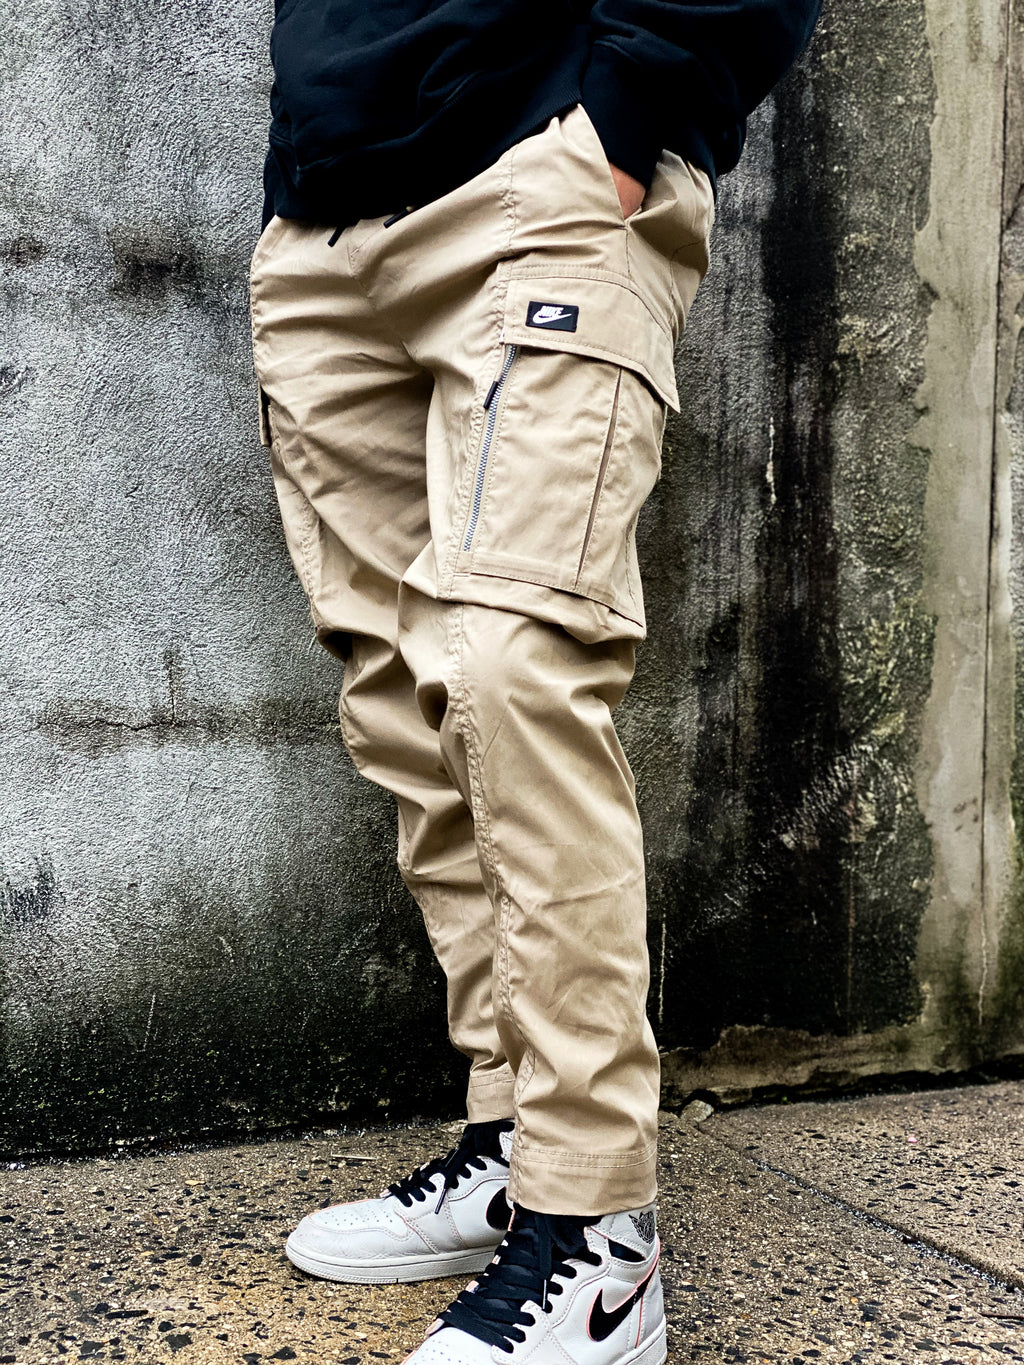 cargo pants and sneakers